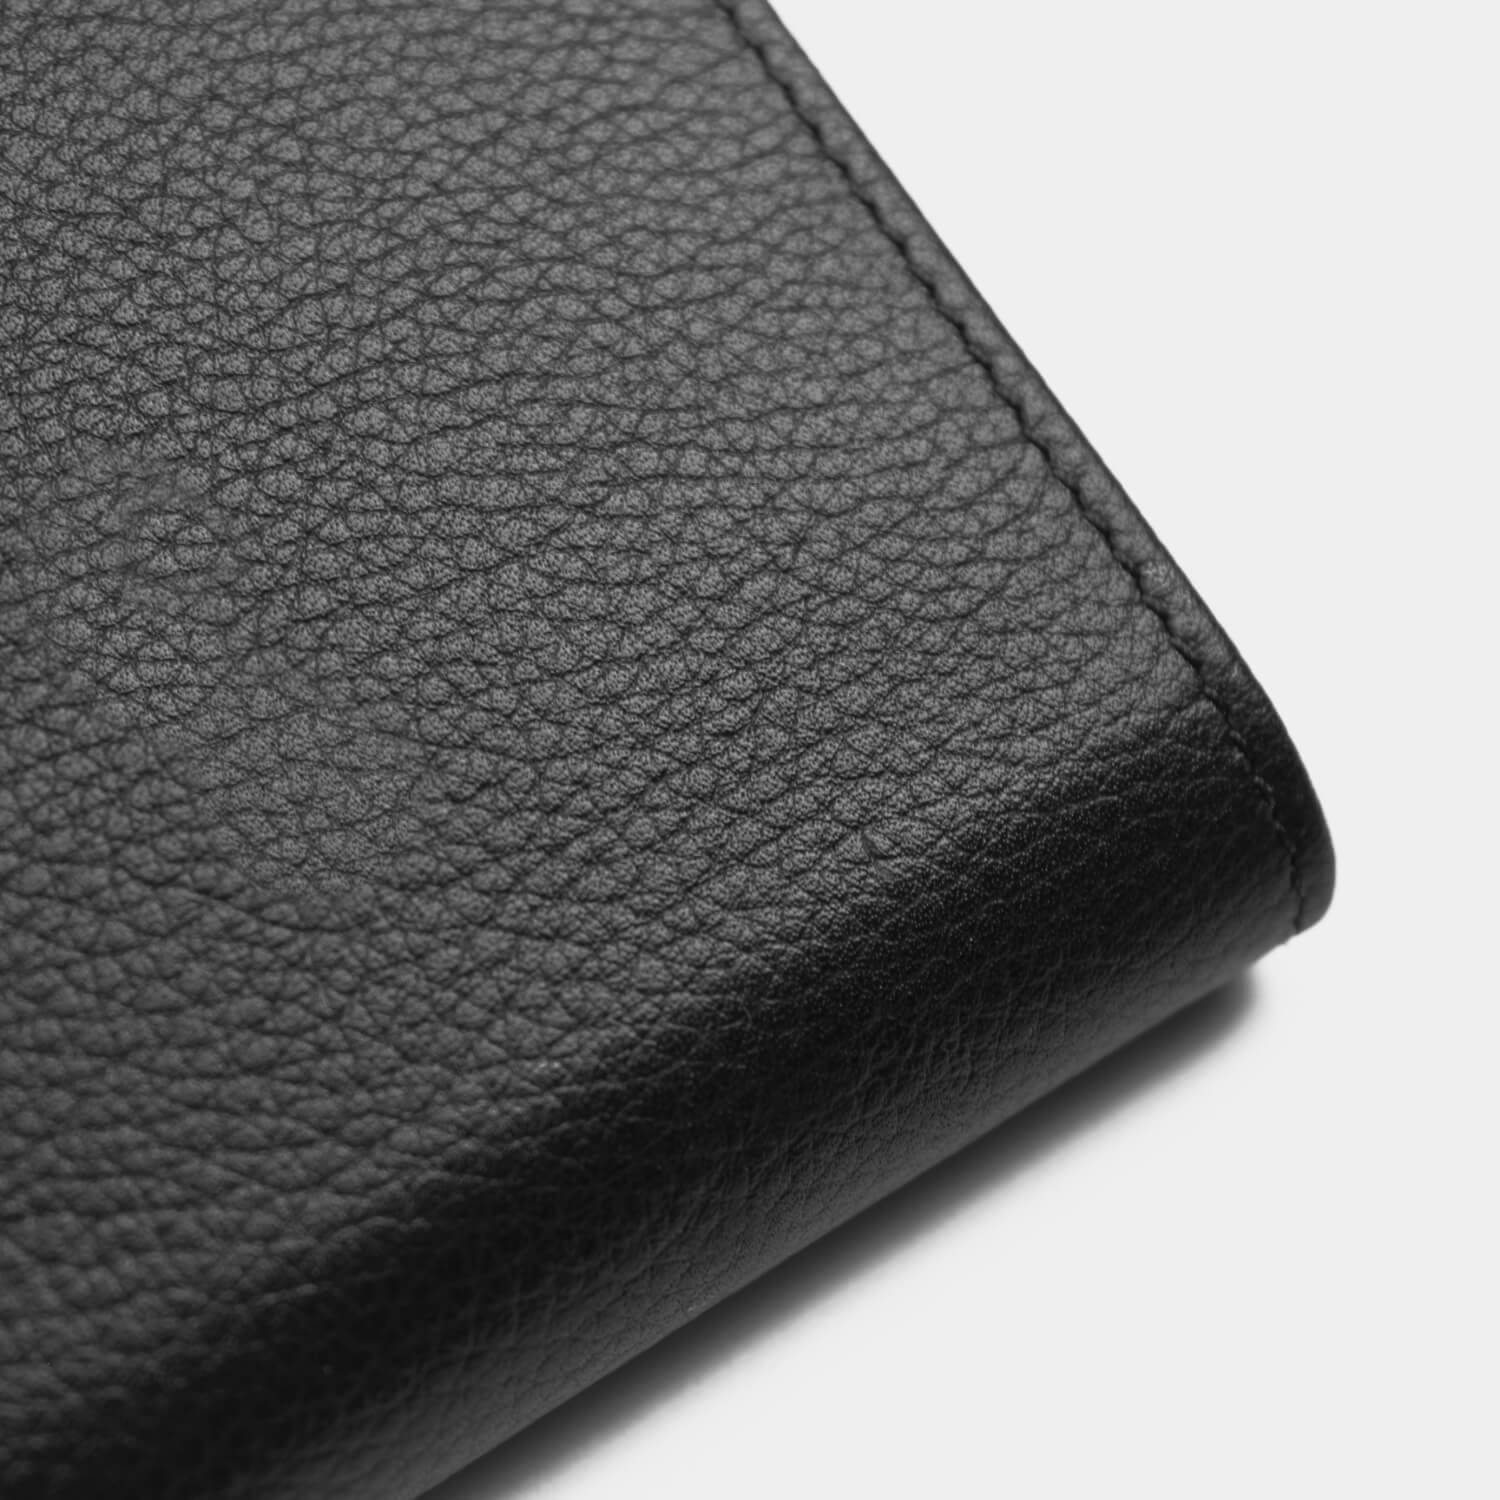 A5 fine grain leather year planner with monthly and daily calendar